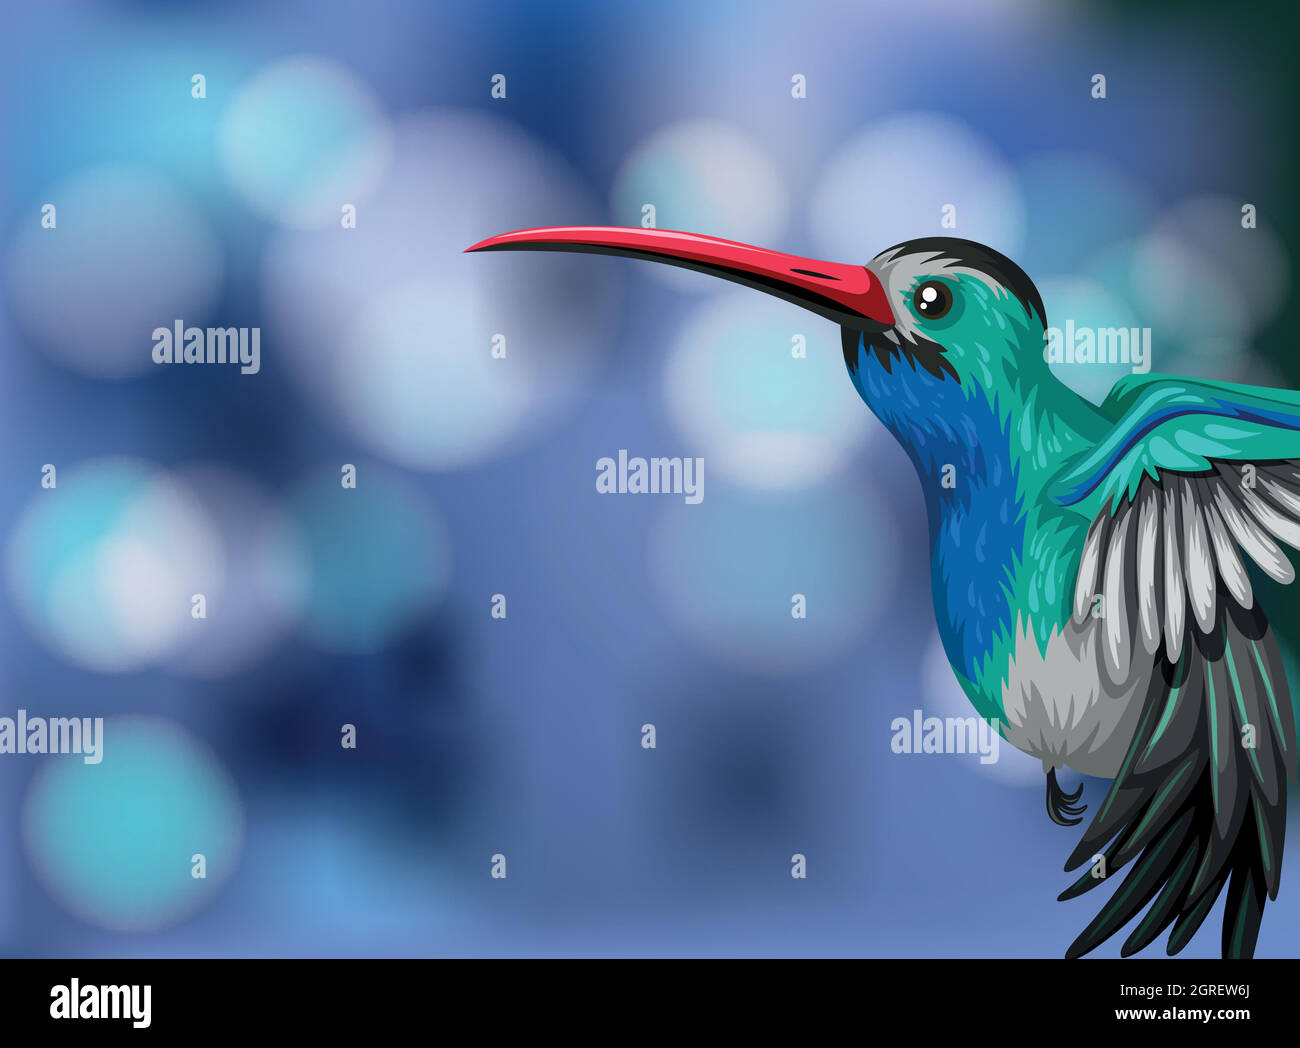 A hummingbird on blurry background Stock Vector